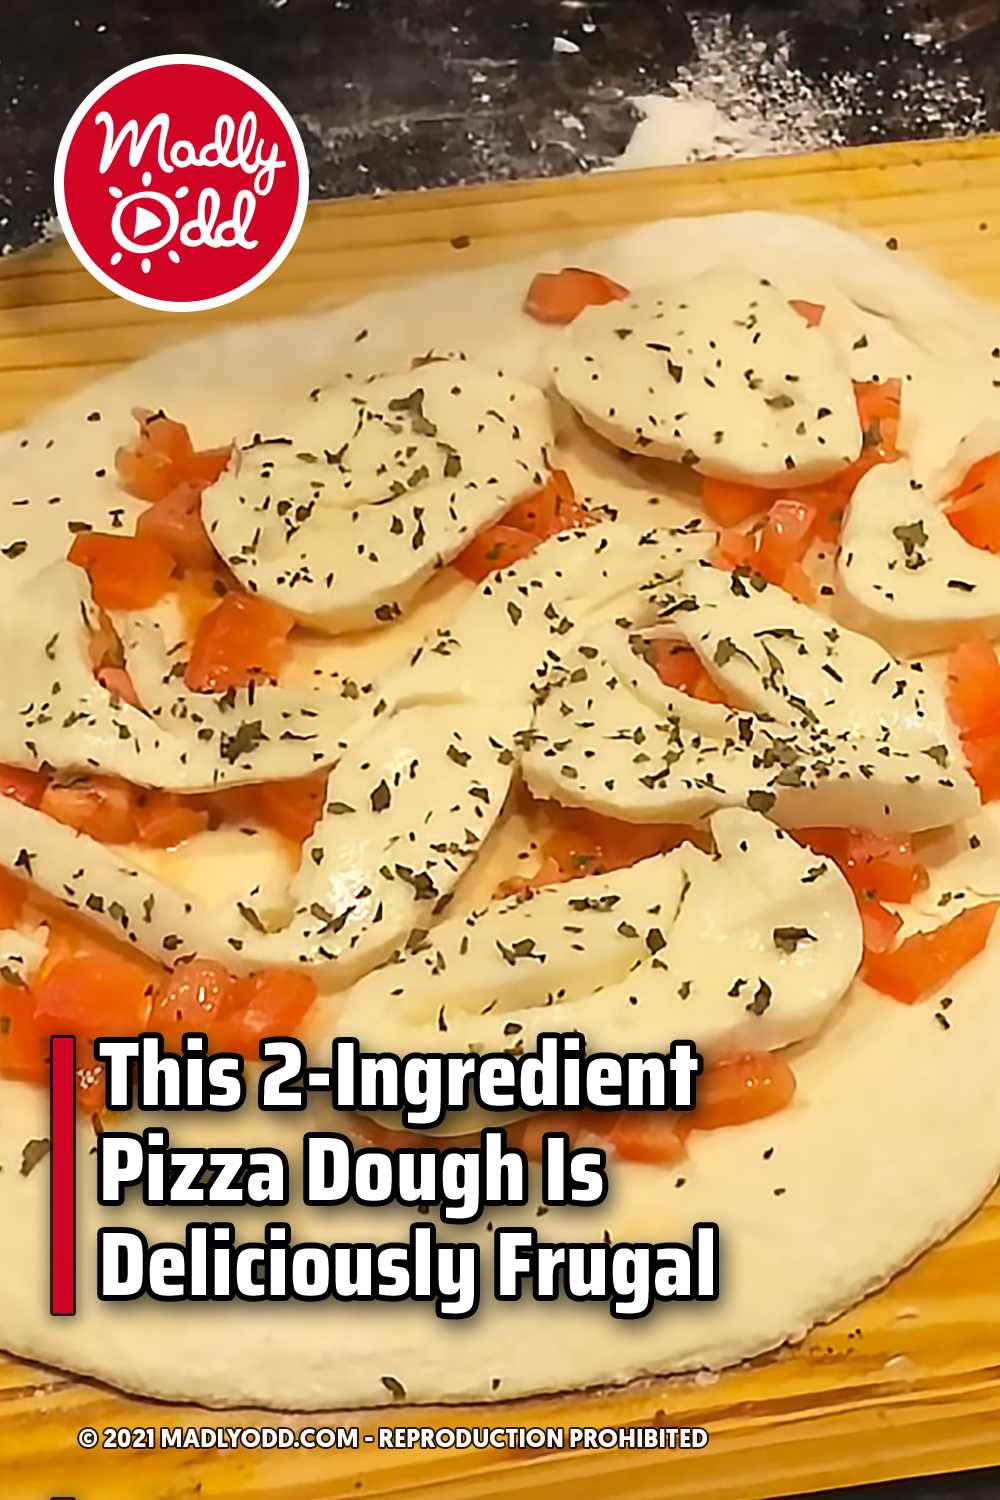 This 2-Ingredient Pizza Dough Is Deliciously Frugal